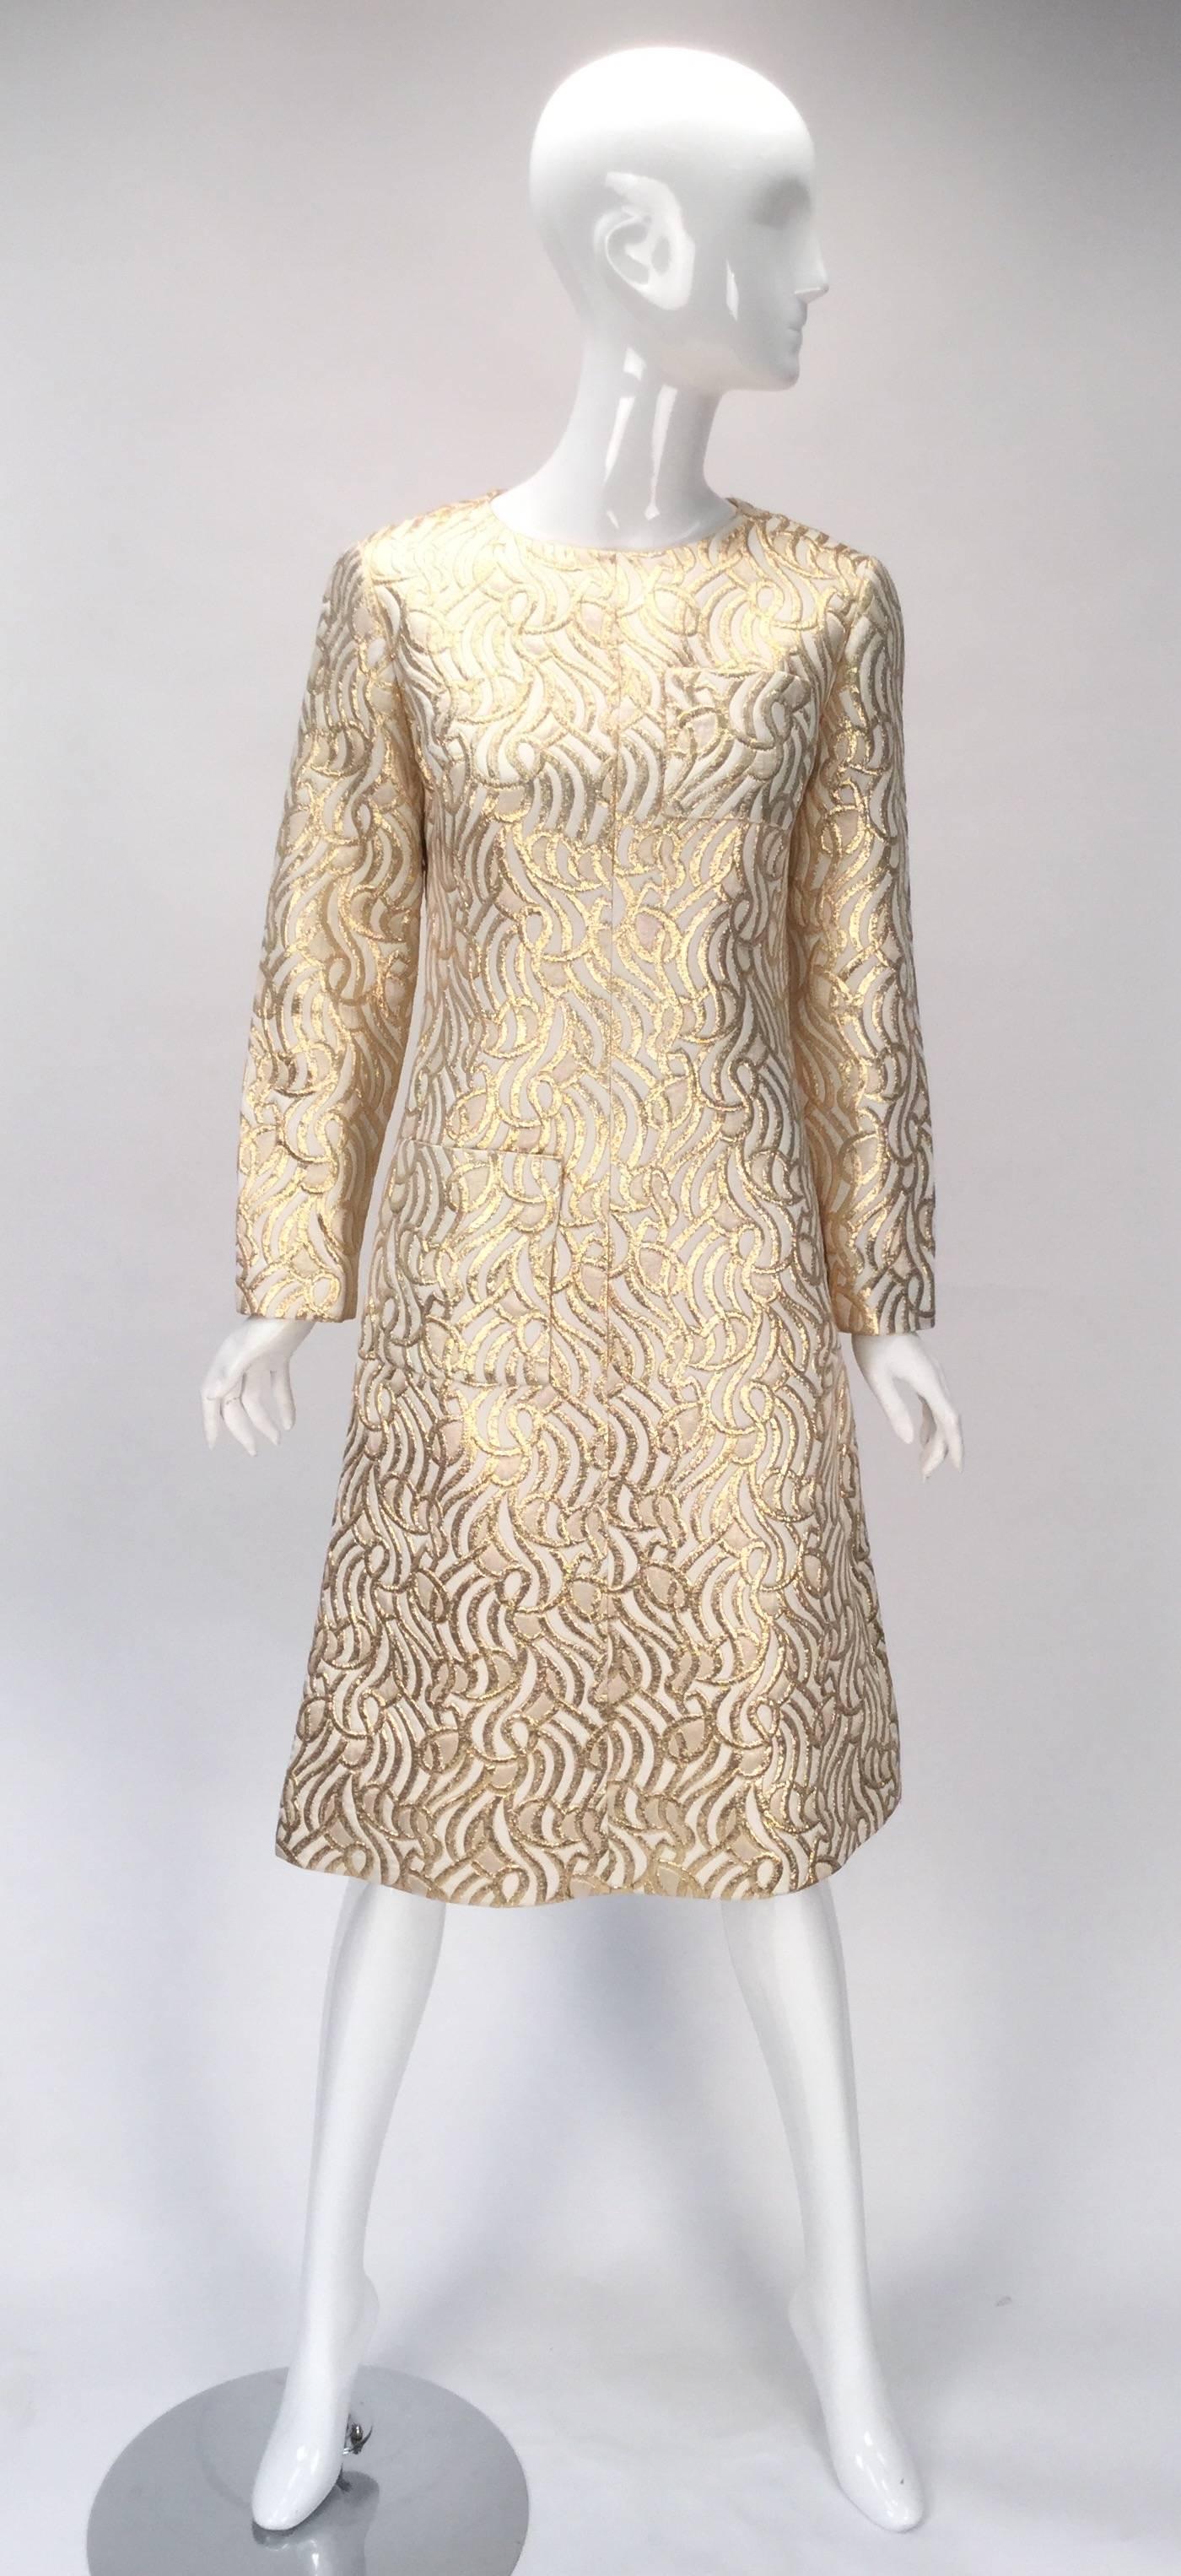 Vintage 1960s dress. This gorgeous cream and gold metallic brocade dress features an abstract organic pattern with undulating waves, swirls, curves, and curls. The dress has a center front seam, pocket at bust and hip, and scoop neckline. The dress